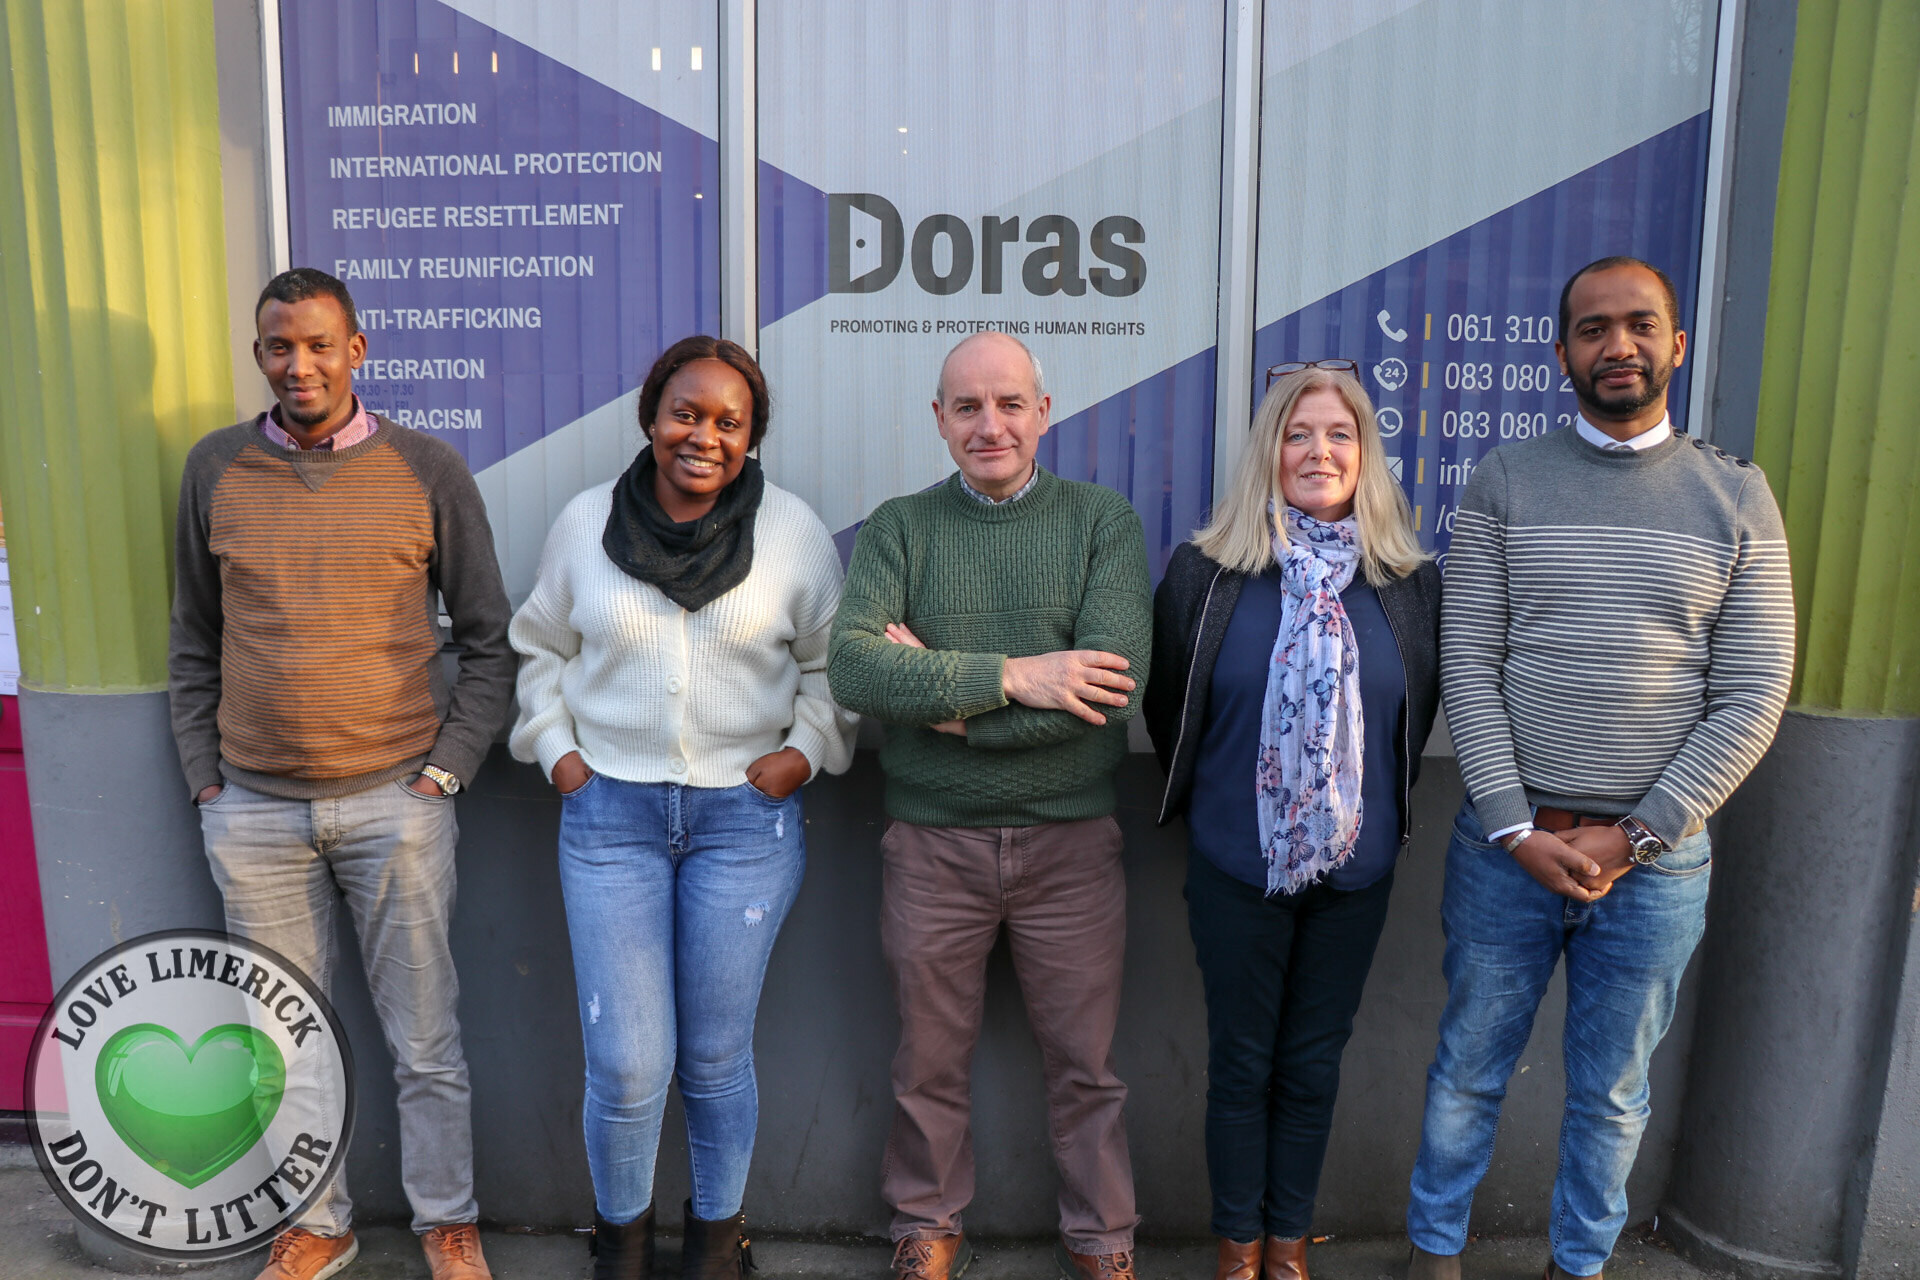 Doras 21st anniversary - Limerick-based migrant support centre Doras celebrates its 21st anniversary this month. Pictured: Hassan Shariif, Legal Advice and Info Officer, Cassandra Lordzenda, Student Volunteer, John Lannon, CEO Doras, Fiona McCaul, General Manager and Ahmed Hassan Mohamed, Community Sponsorship Officer.